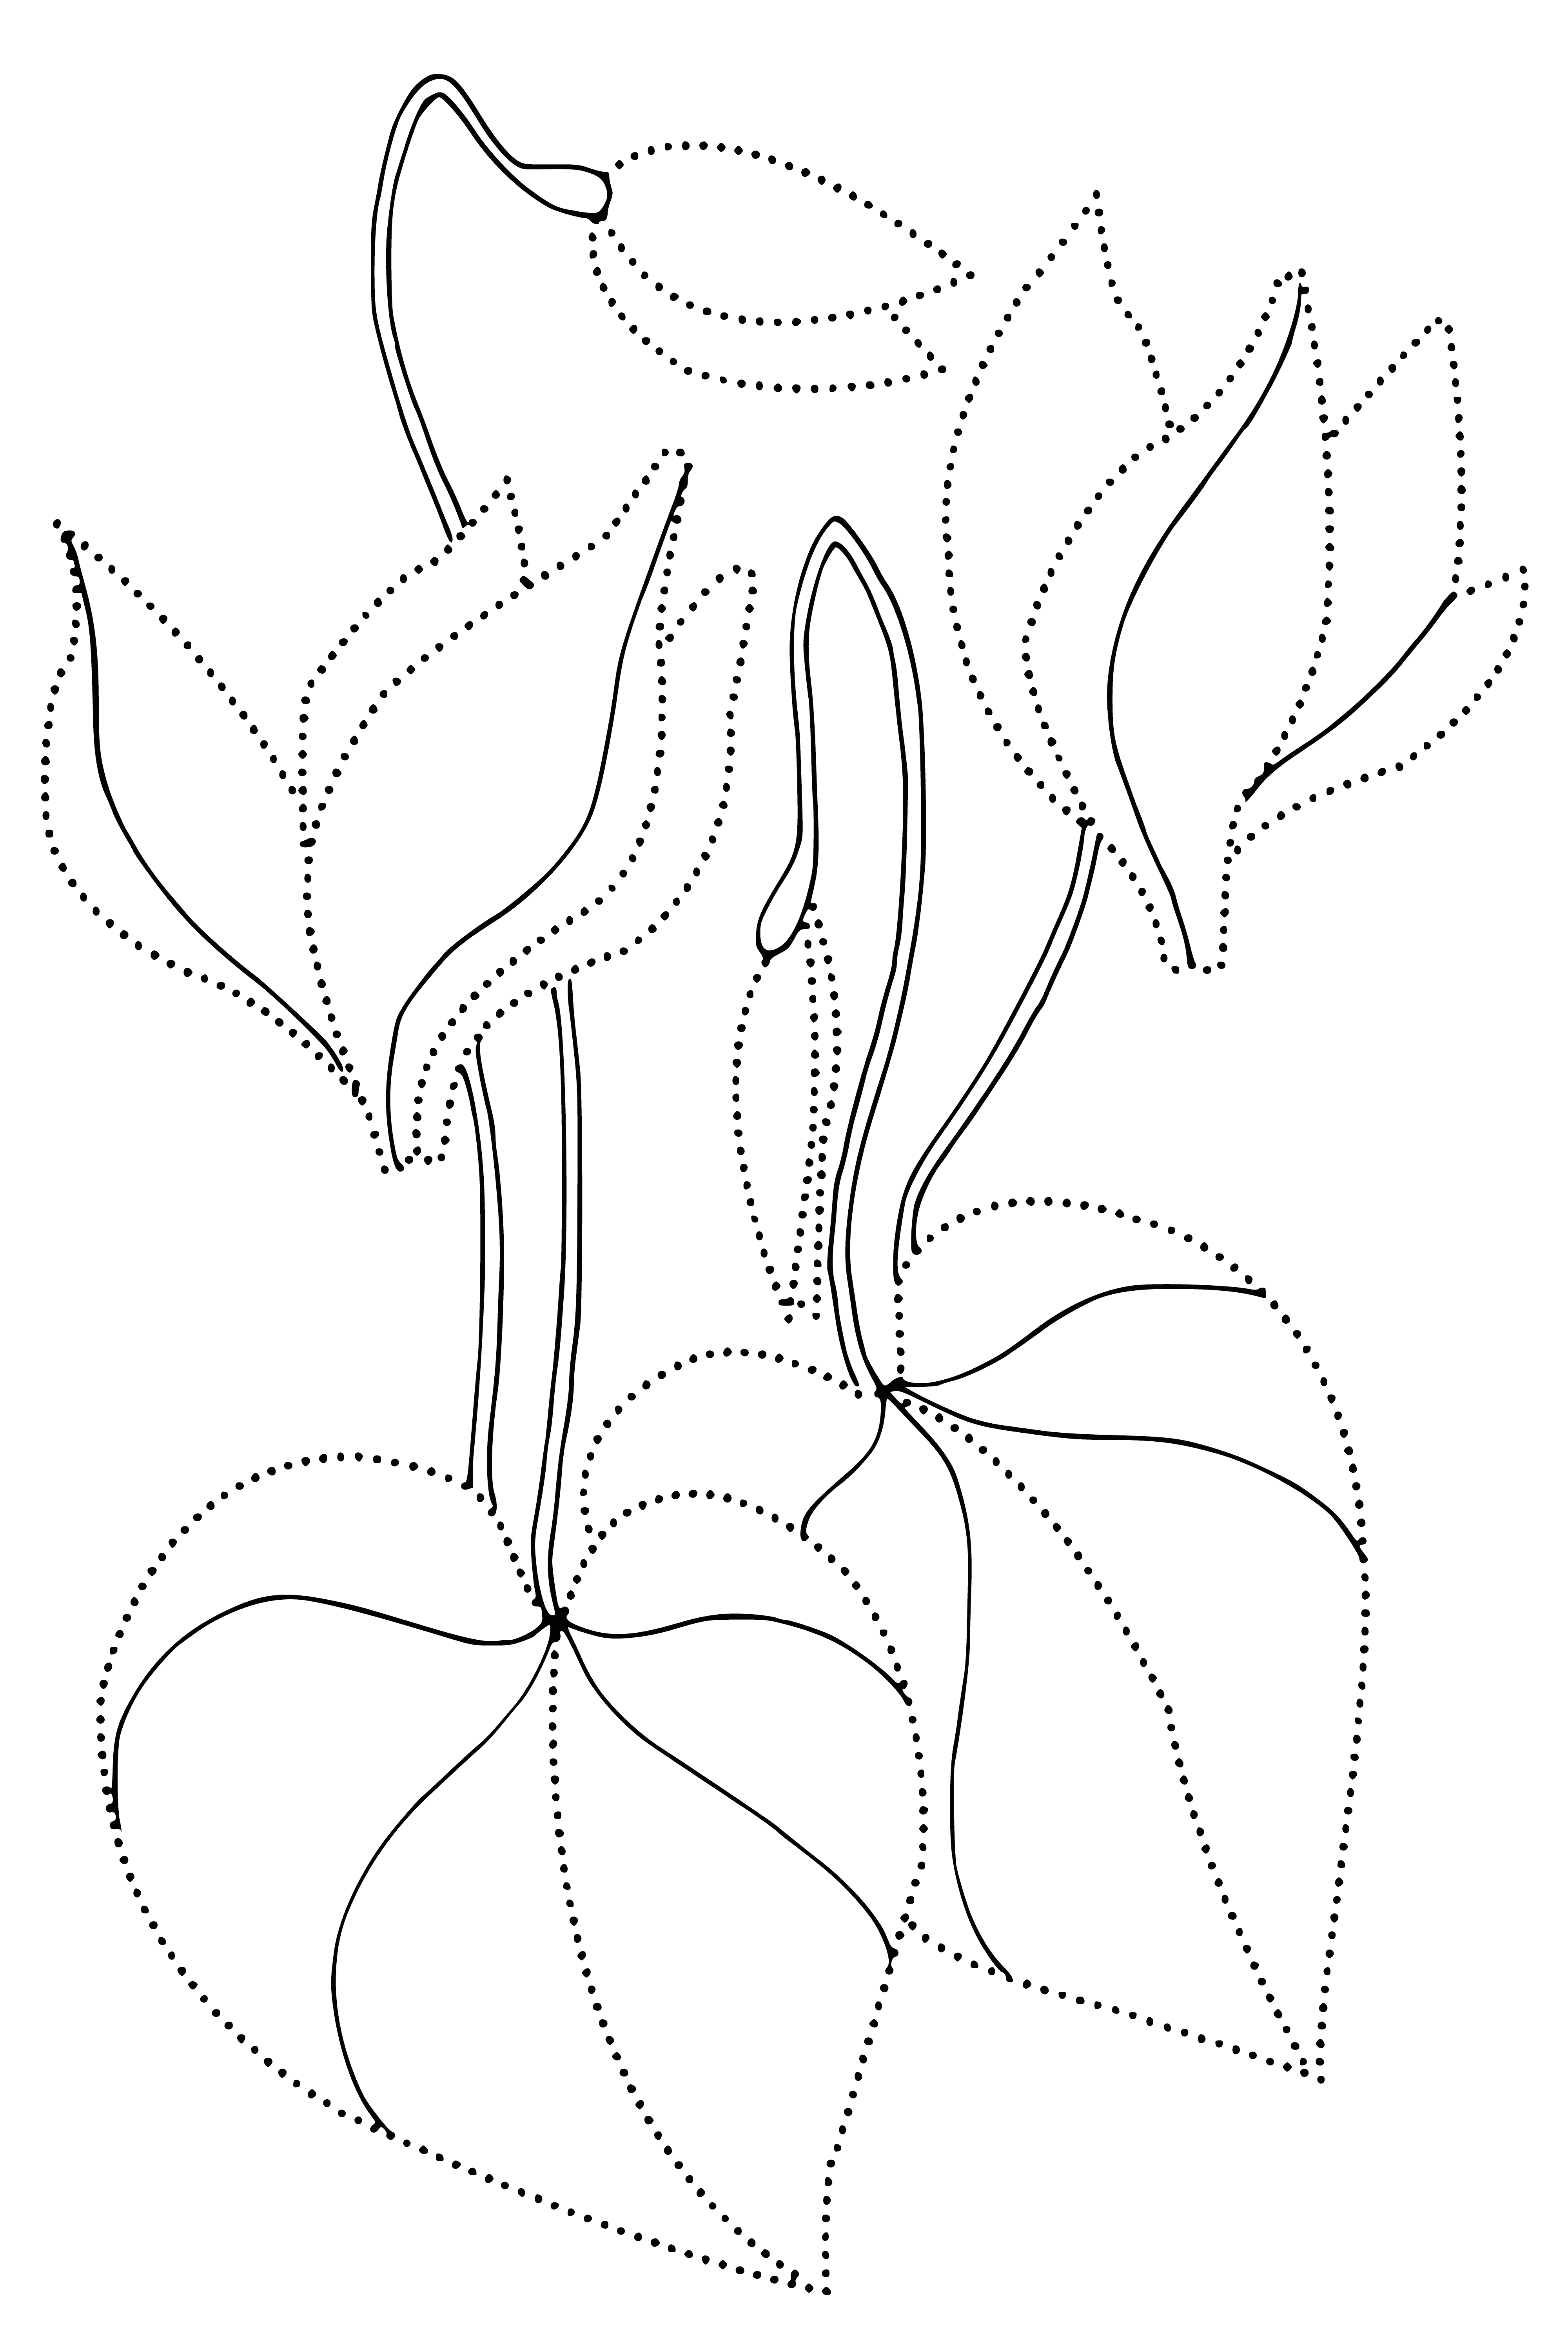 Water lilies coloring page